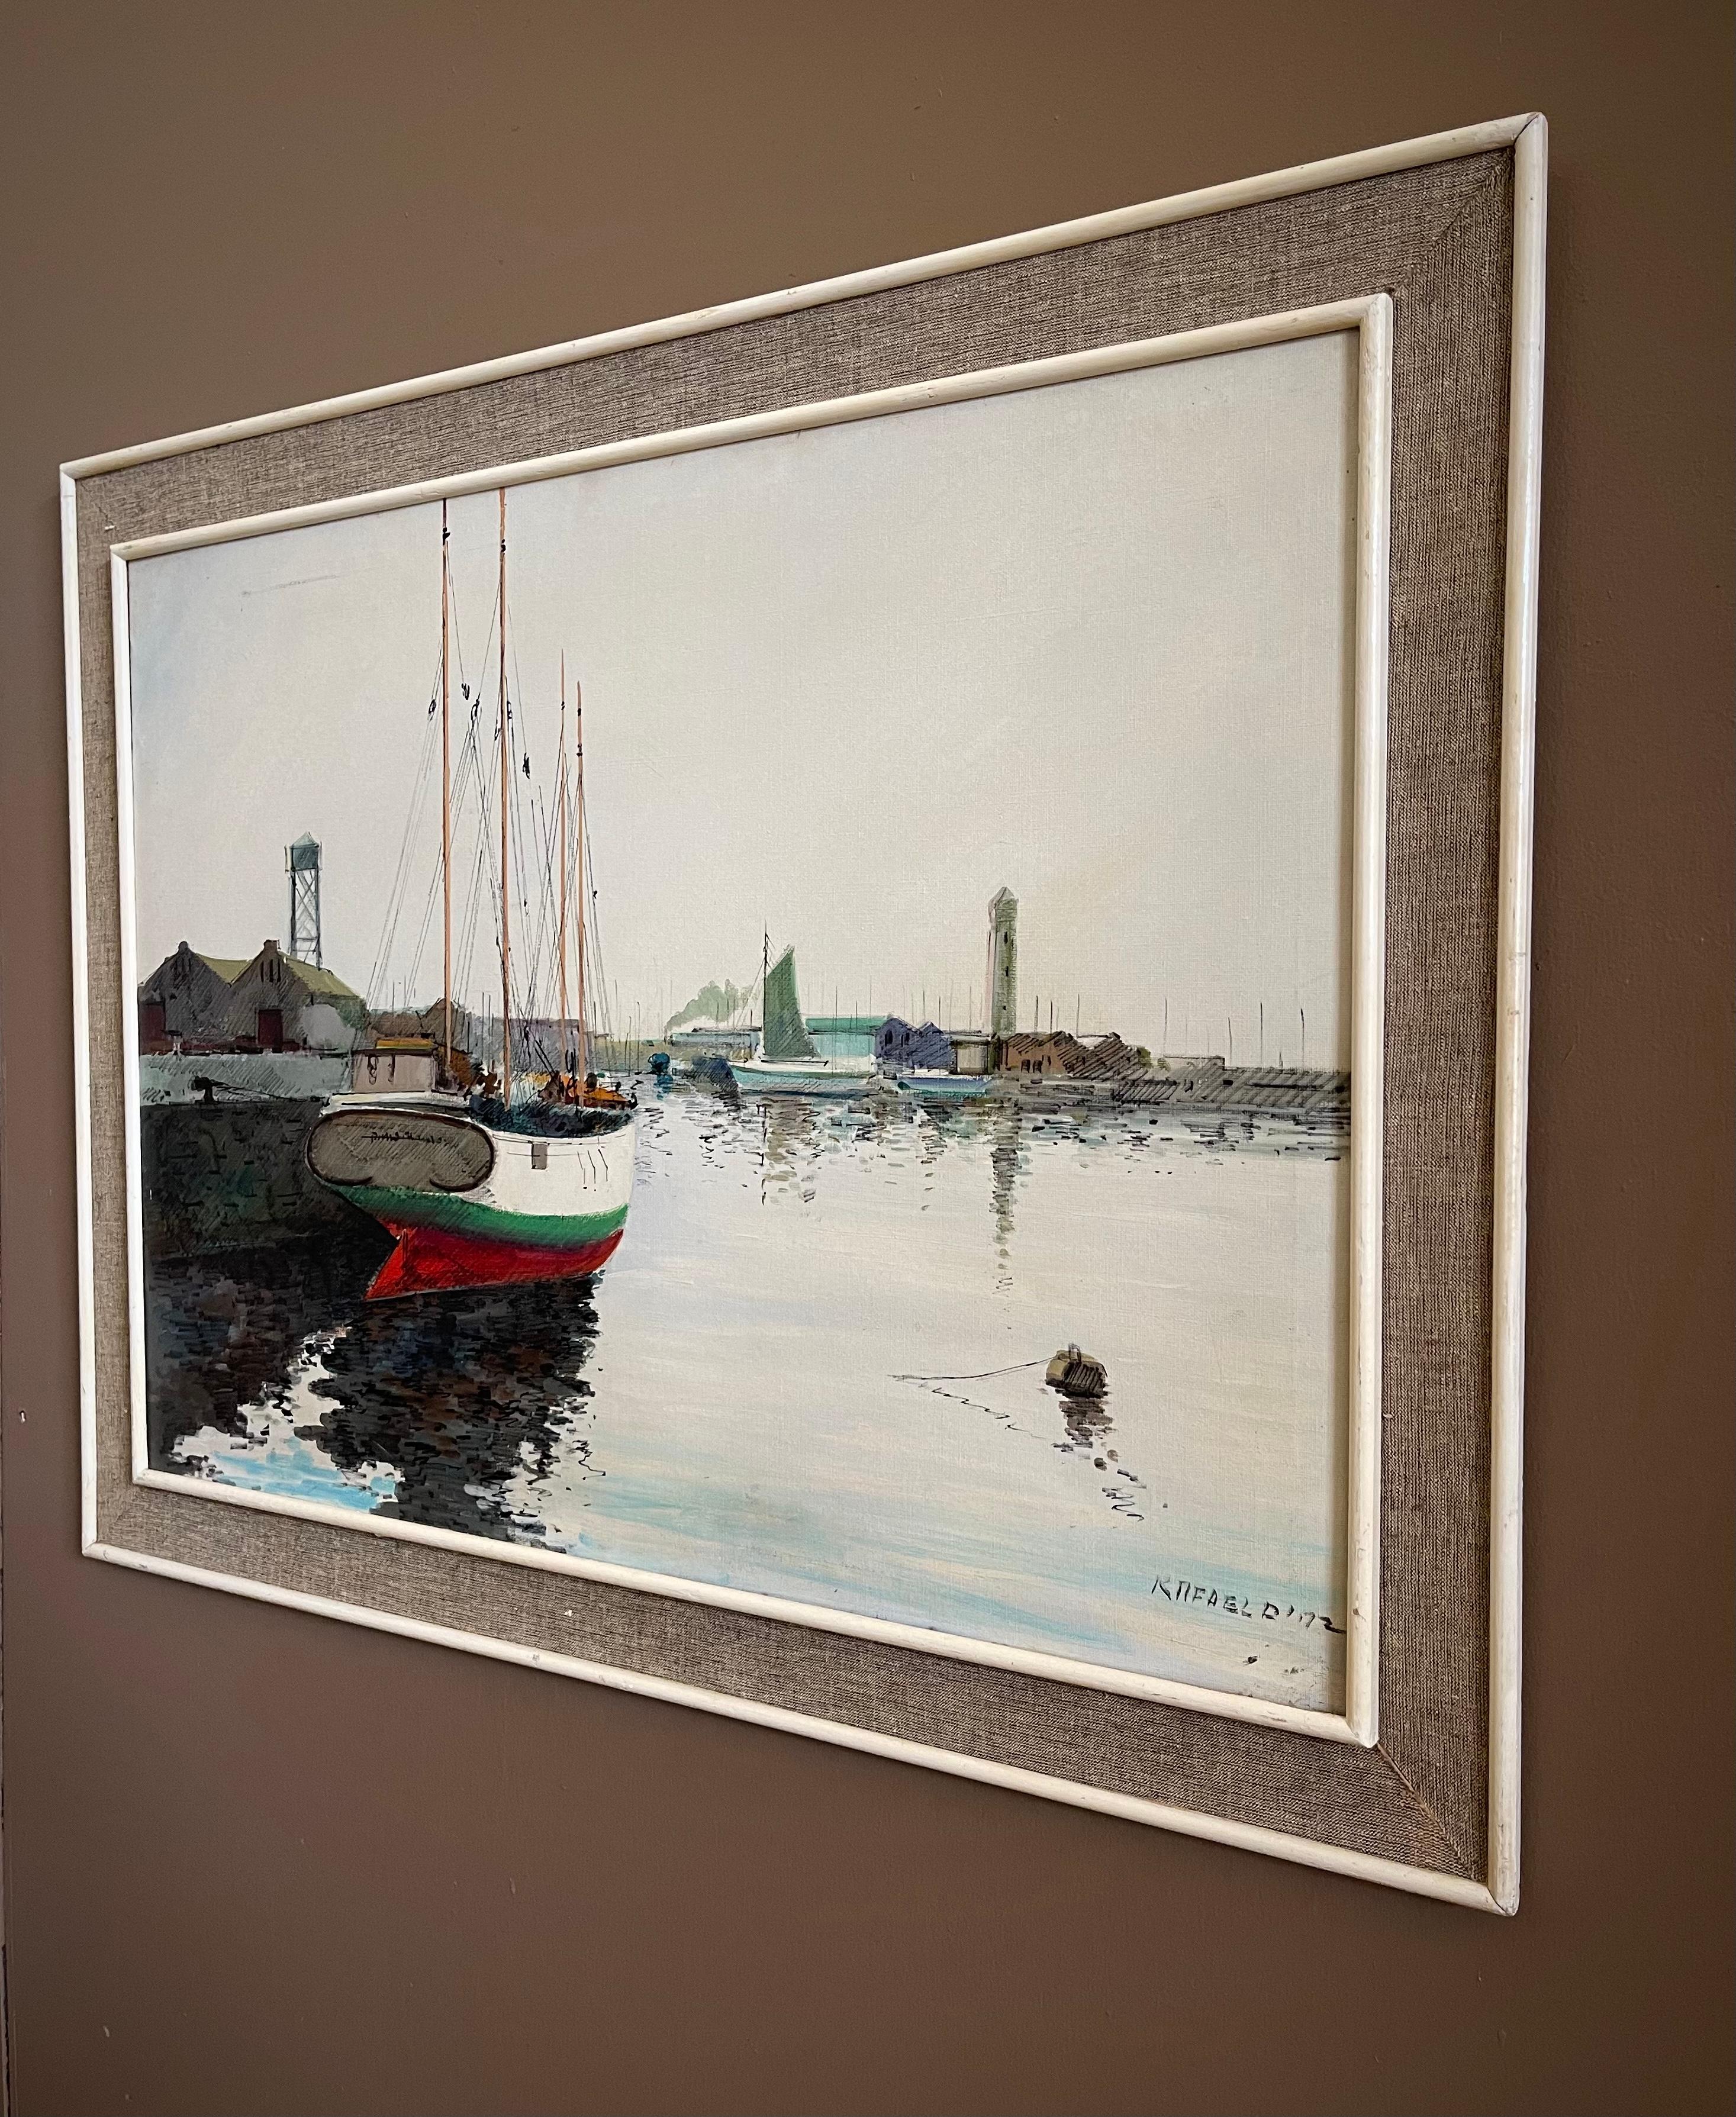 Immerse yourself in this serene maritime scene of boats swaying on the water tied in a calm harbor. Painting is oil on canvas framed in a creamy white narrow frame with a natural linen mat section. Signed by Rafael Diaz. Actual image measurement is